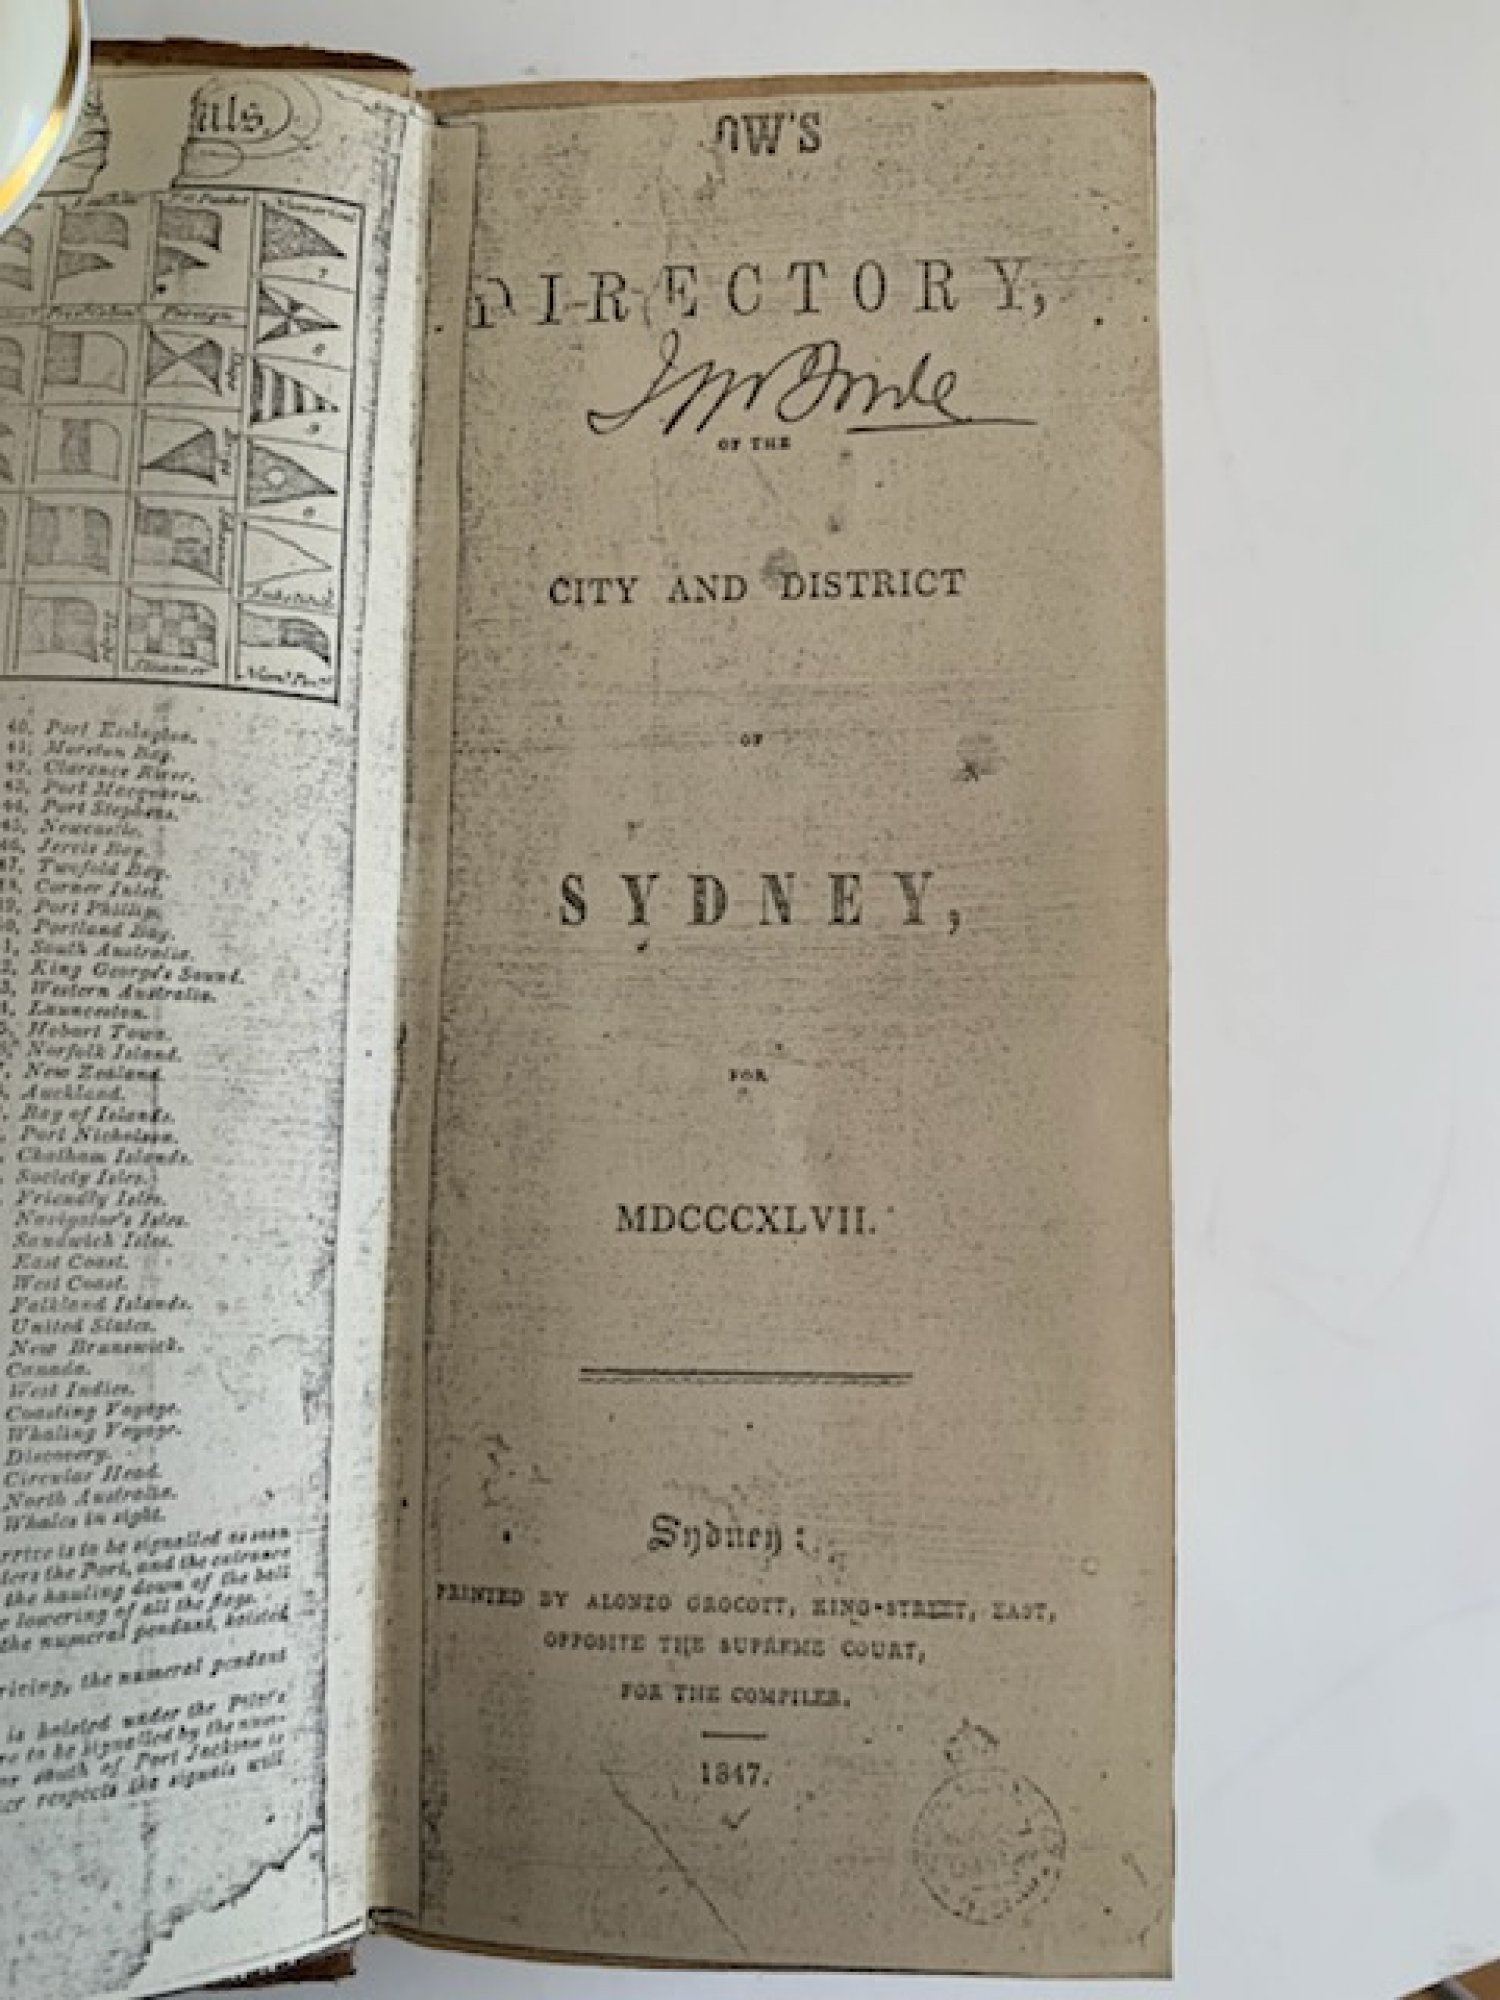 “Lows Directory for City and District of Sydney,1847”